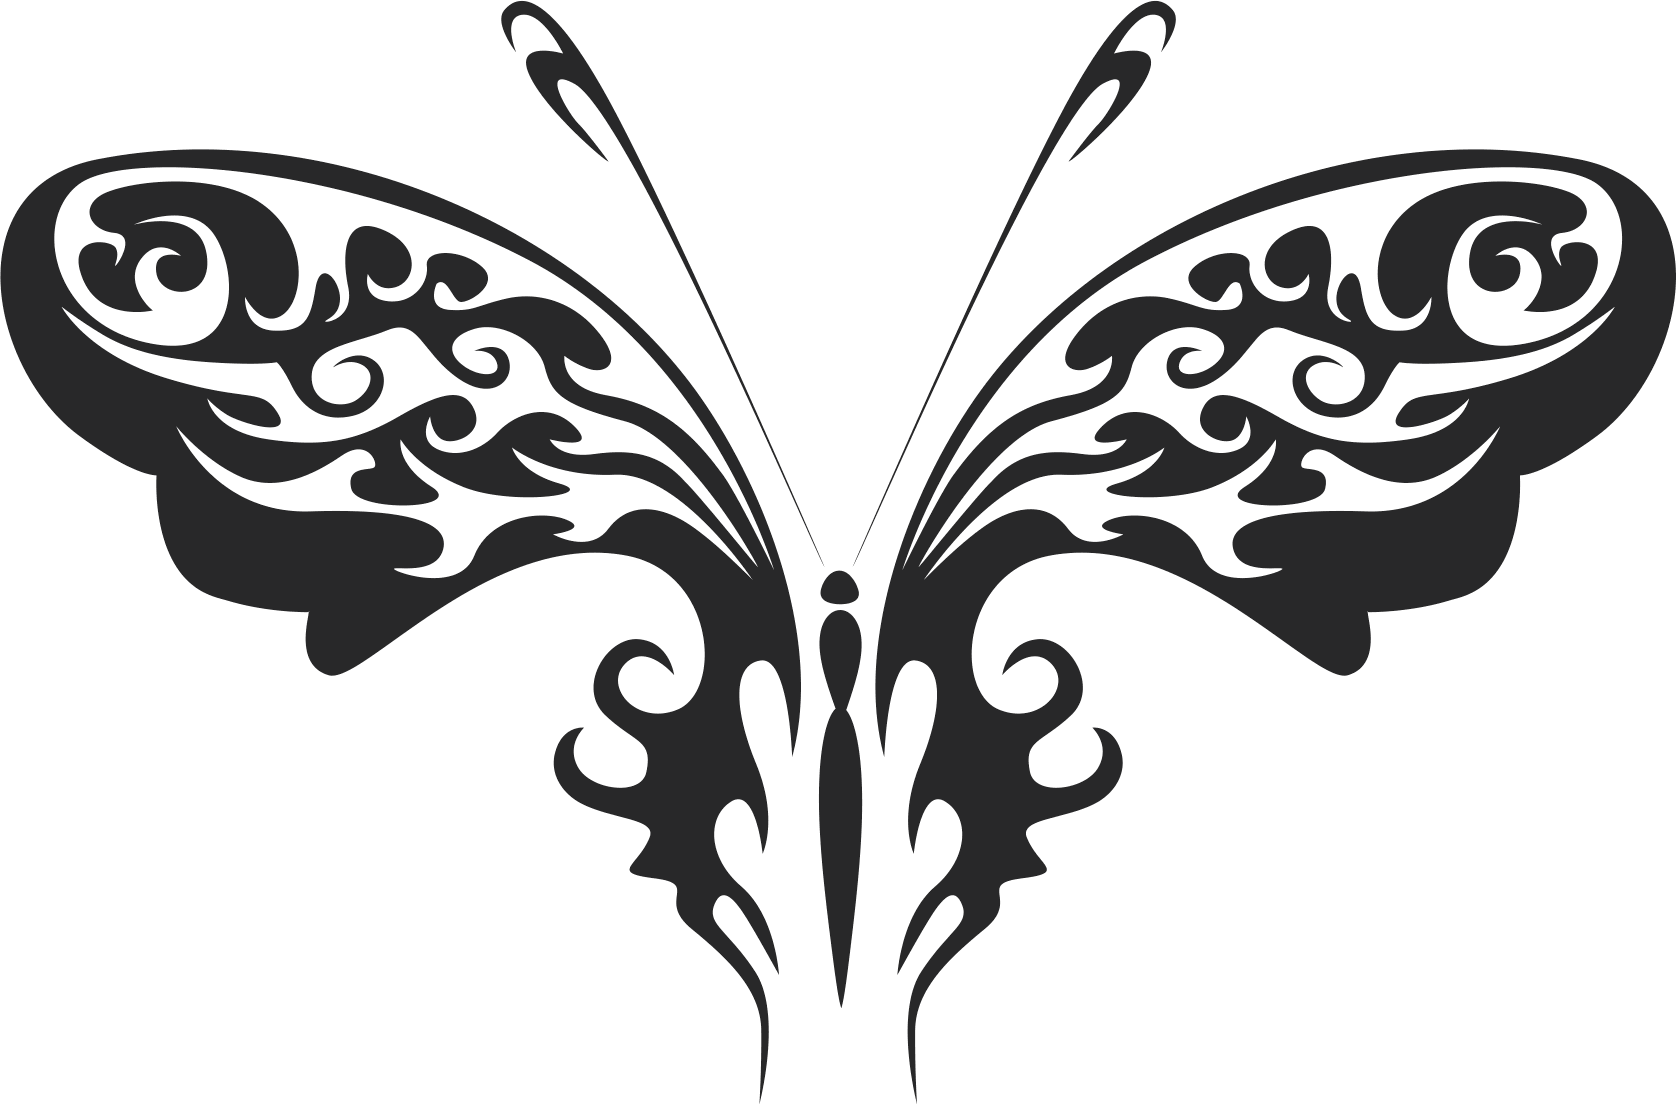 Tattoo Tribal Butterfly 444 Free DXF File